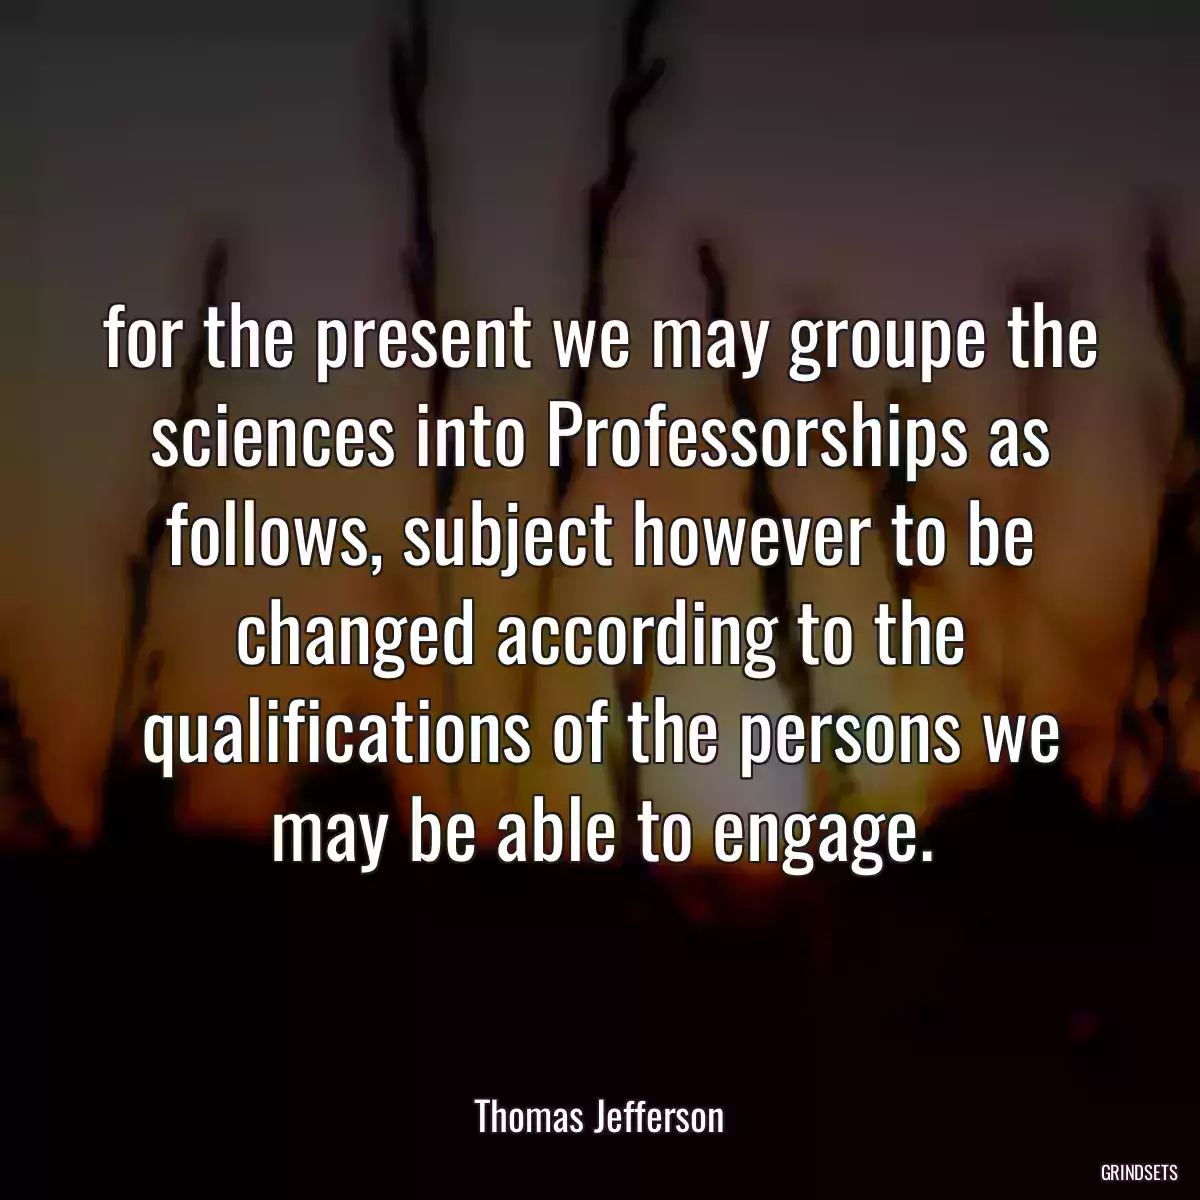 for the present we may groupe the sciences into Professorships as follows, subject however to be changed according to the qualifications of the persons we may be able to engage.